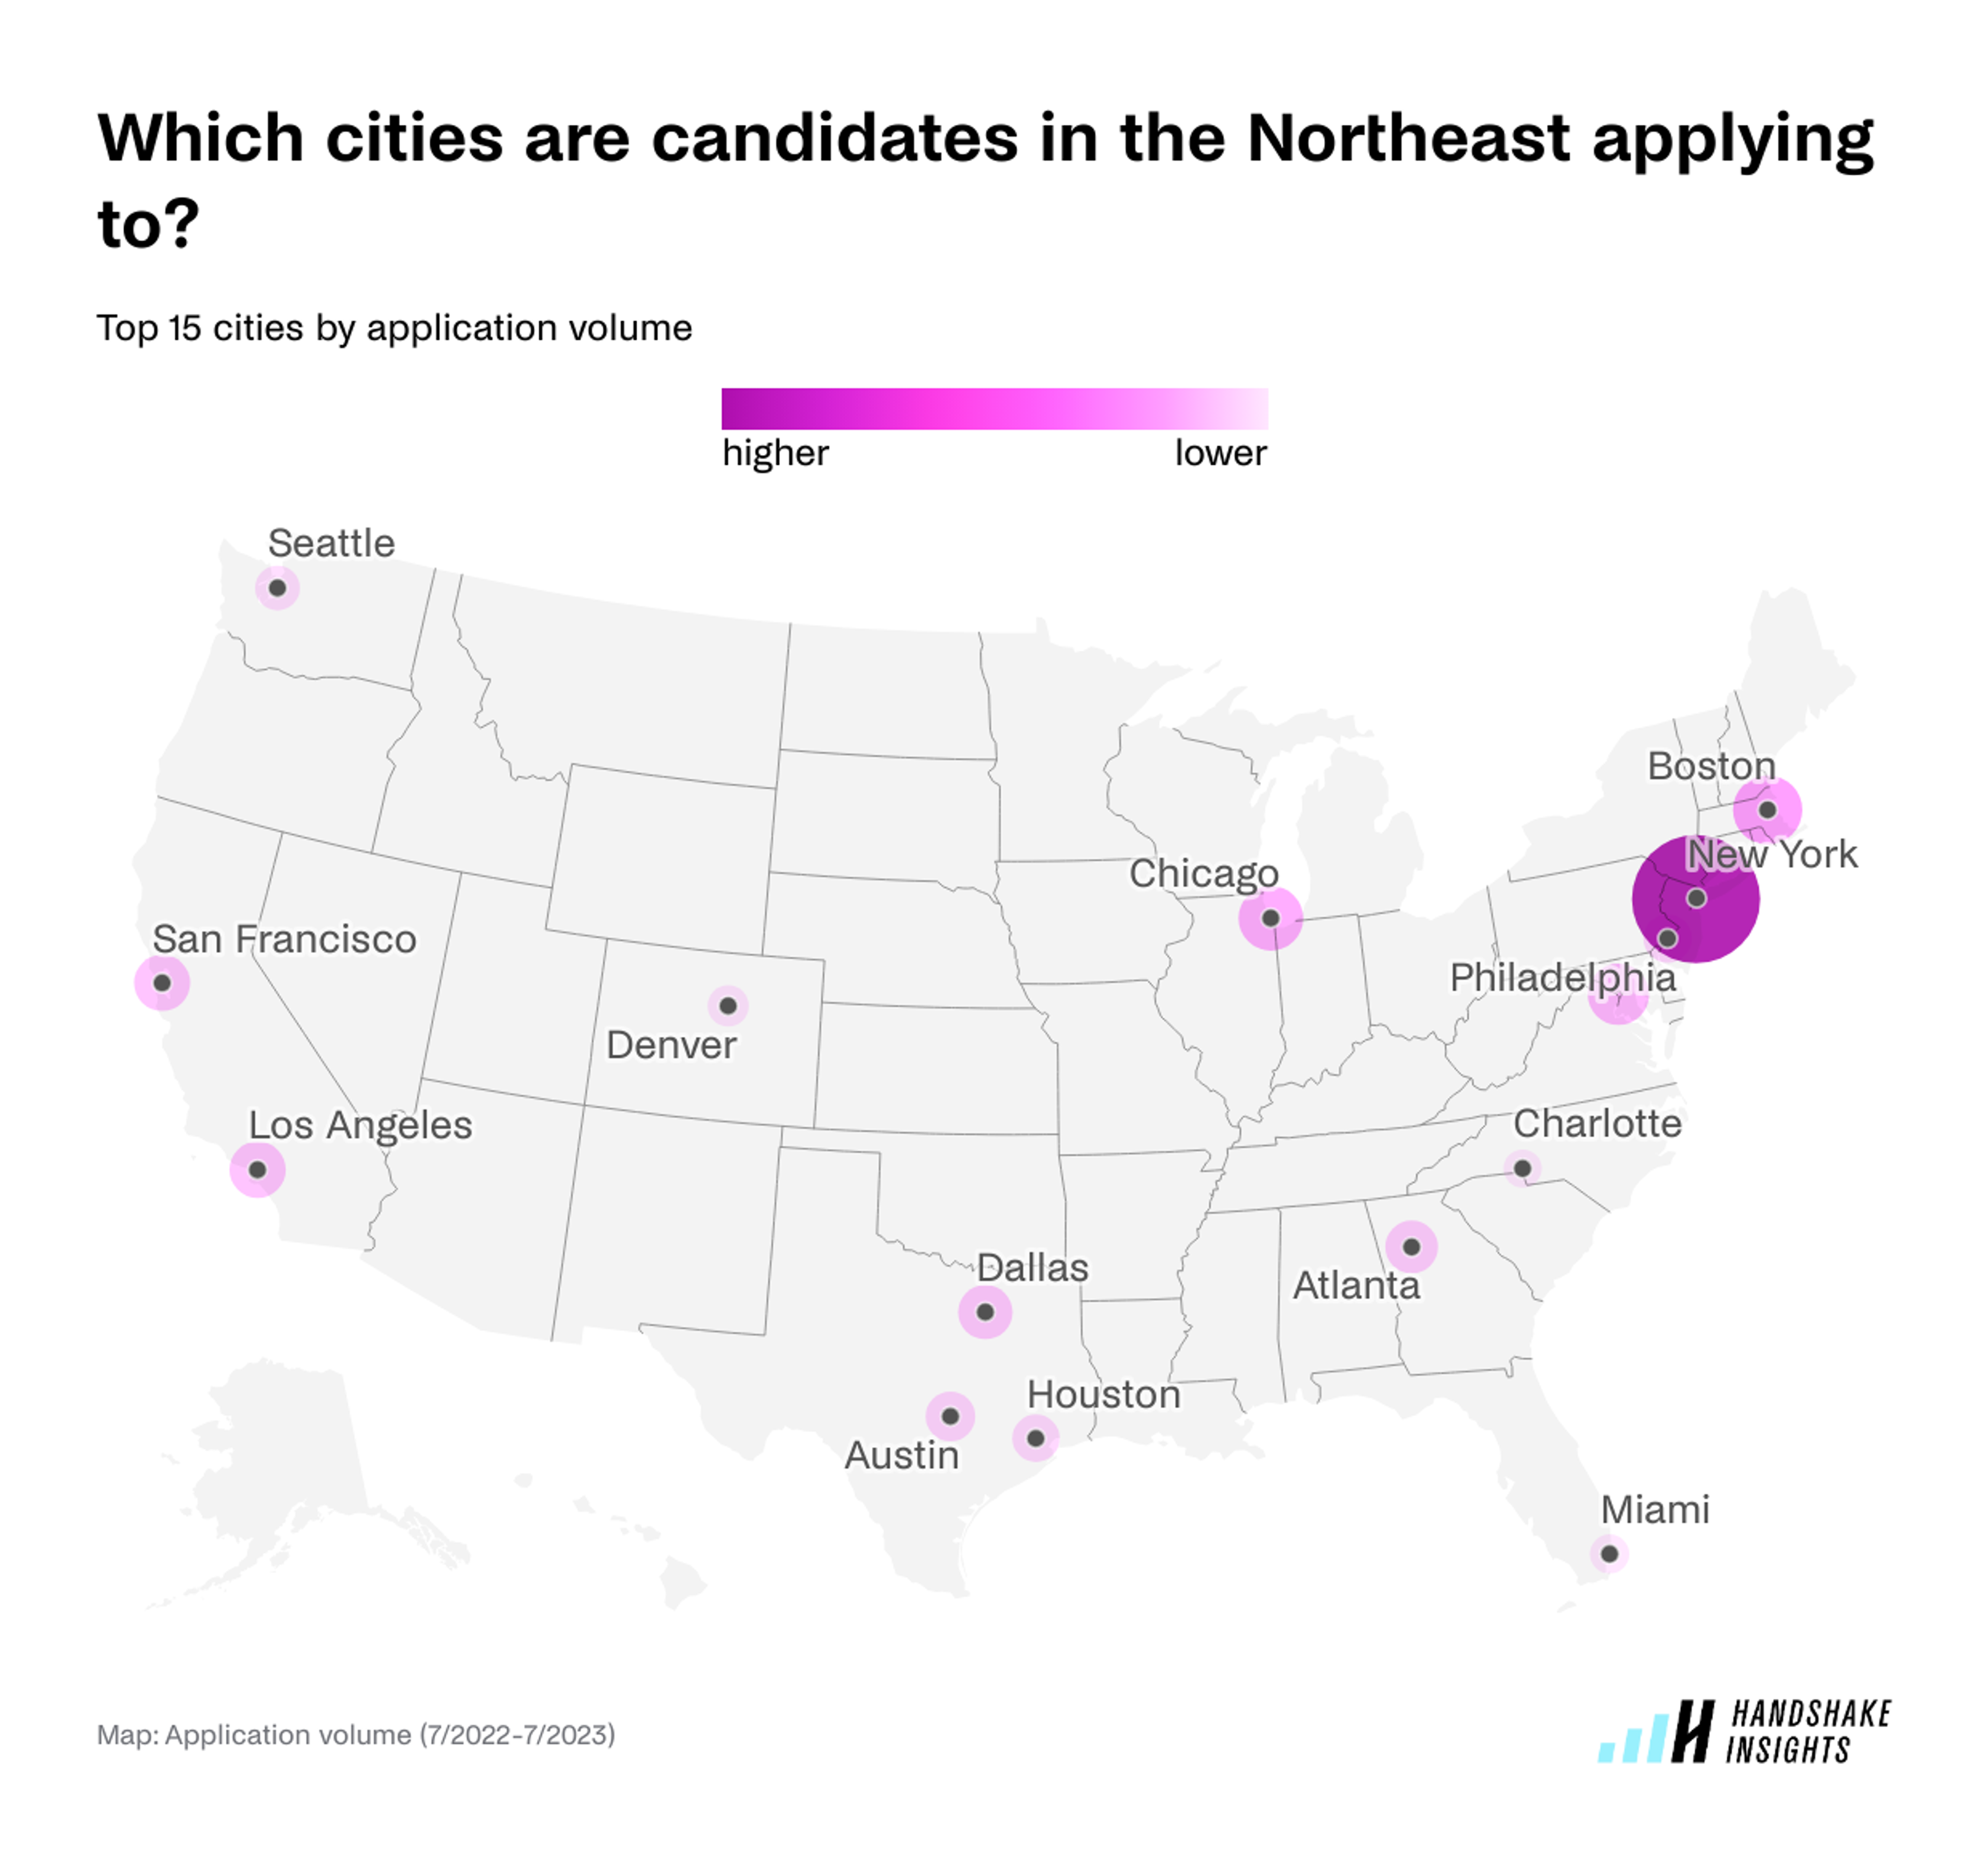 Top 15 cities where college students and recent grads in the Northeast are applying